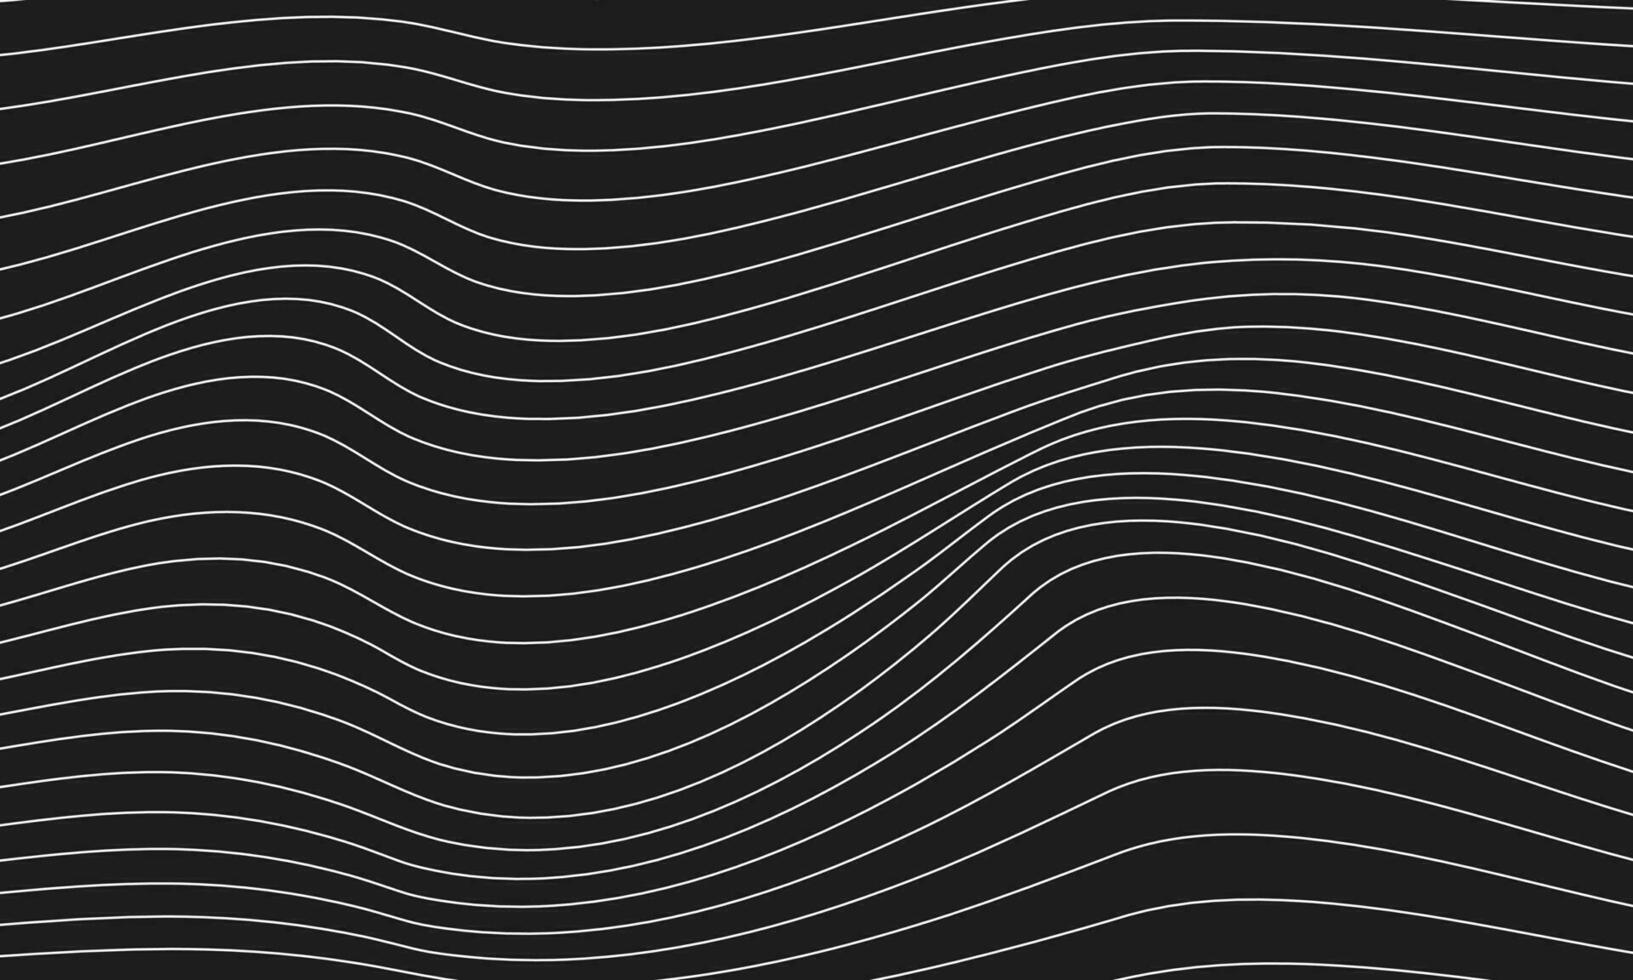 Wavy lines abstract background vector